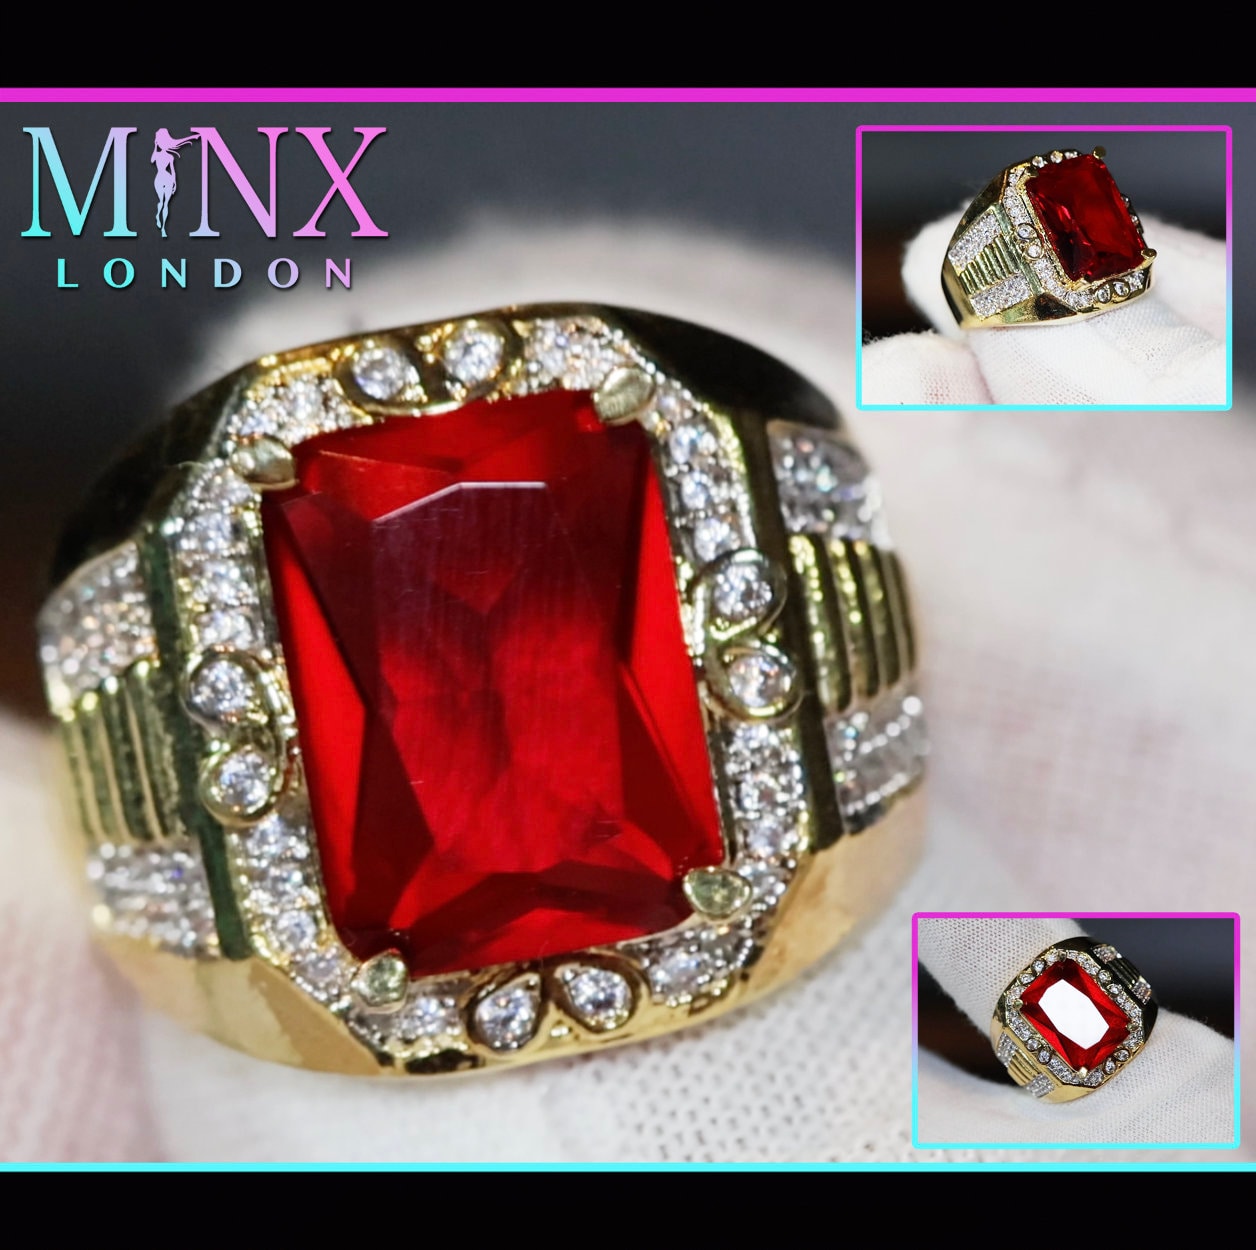 55Carat Genuine Indian Ruby Mens Ring Bold 925 Sterling Silver July  Birthstone Sizes 4,5,6,7,8,9,10,11,12|Amazon.com